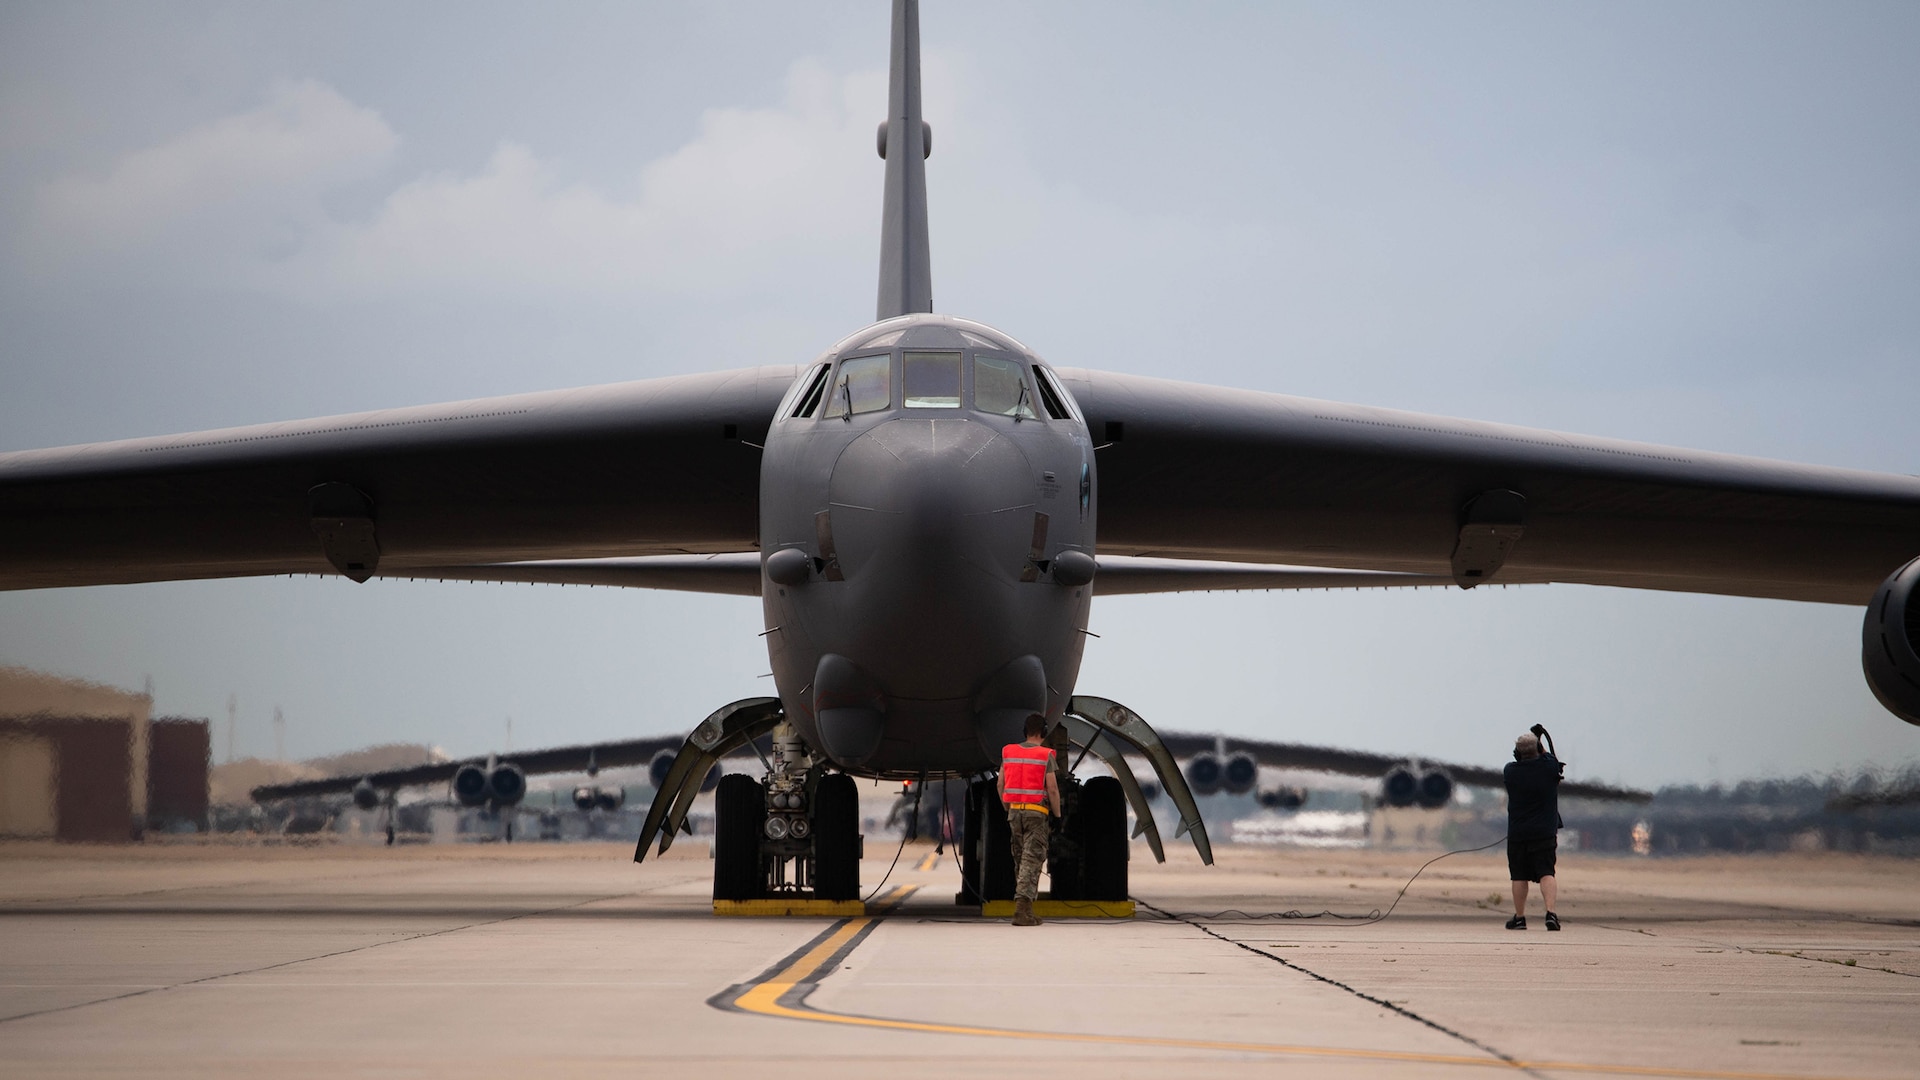 U.S. Air Force bombers conduct global BTF mission